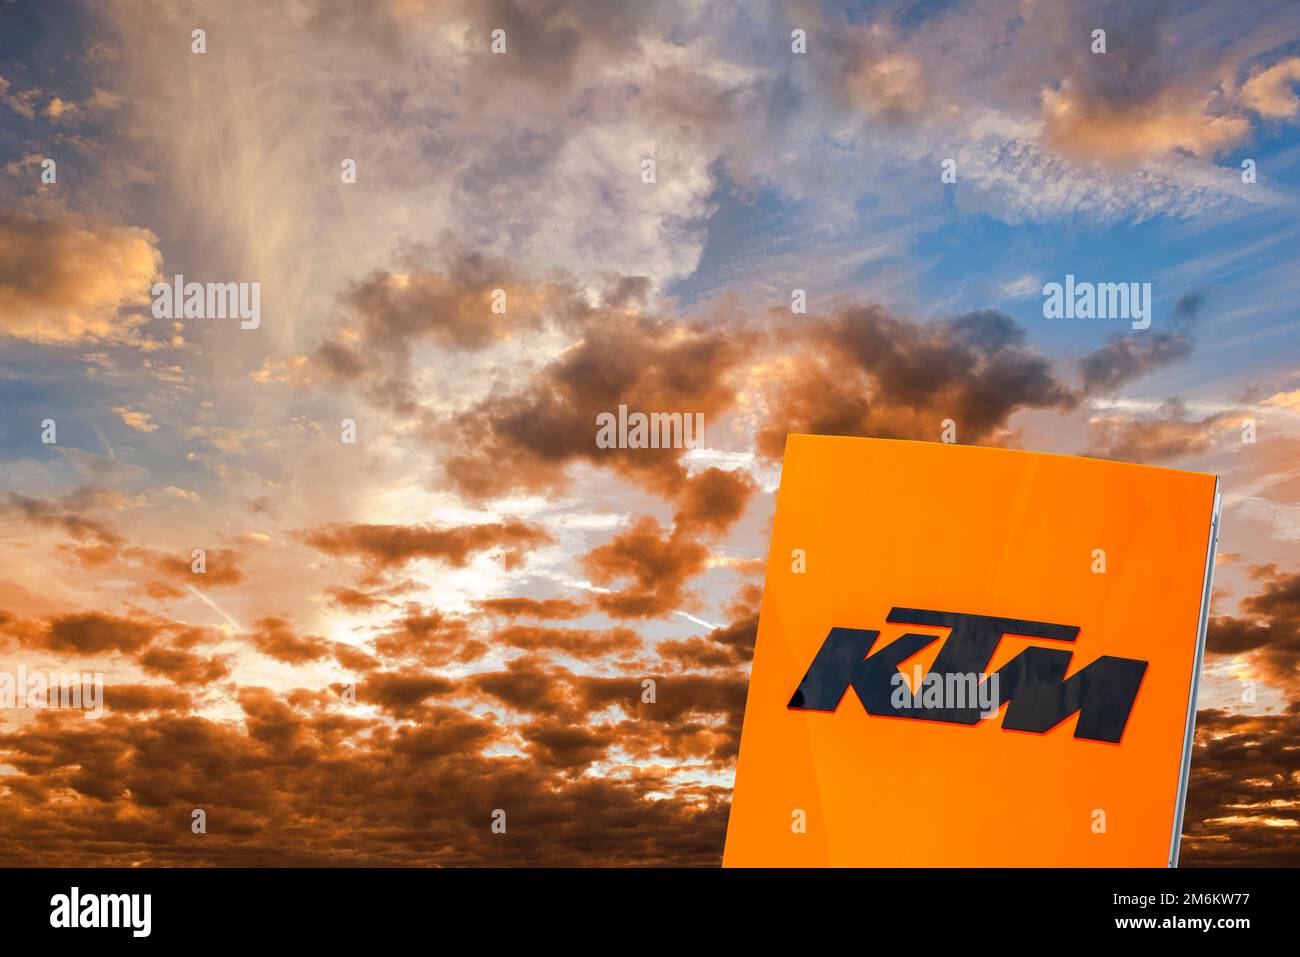 Advertising and company sign of the company KTM Stock Photo